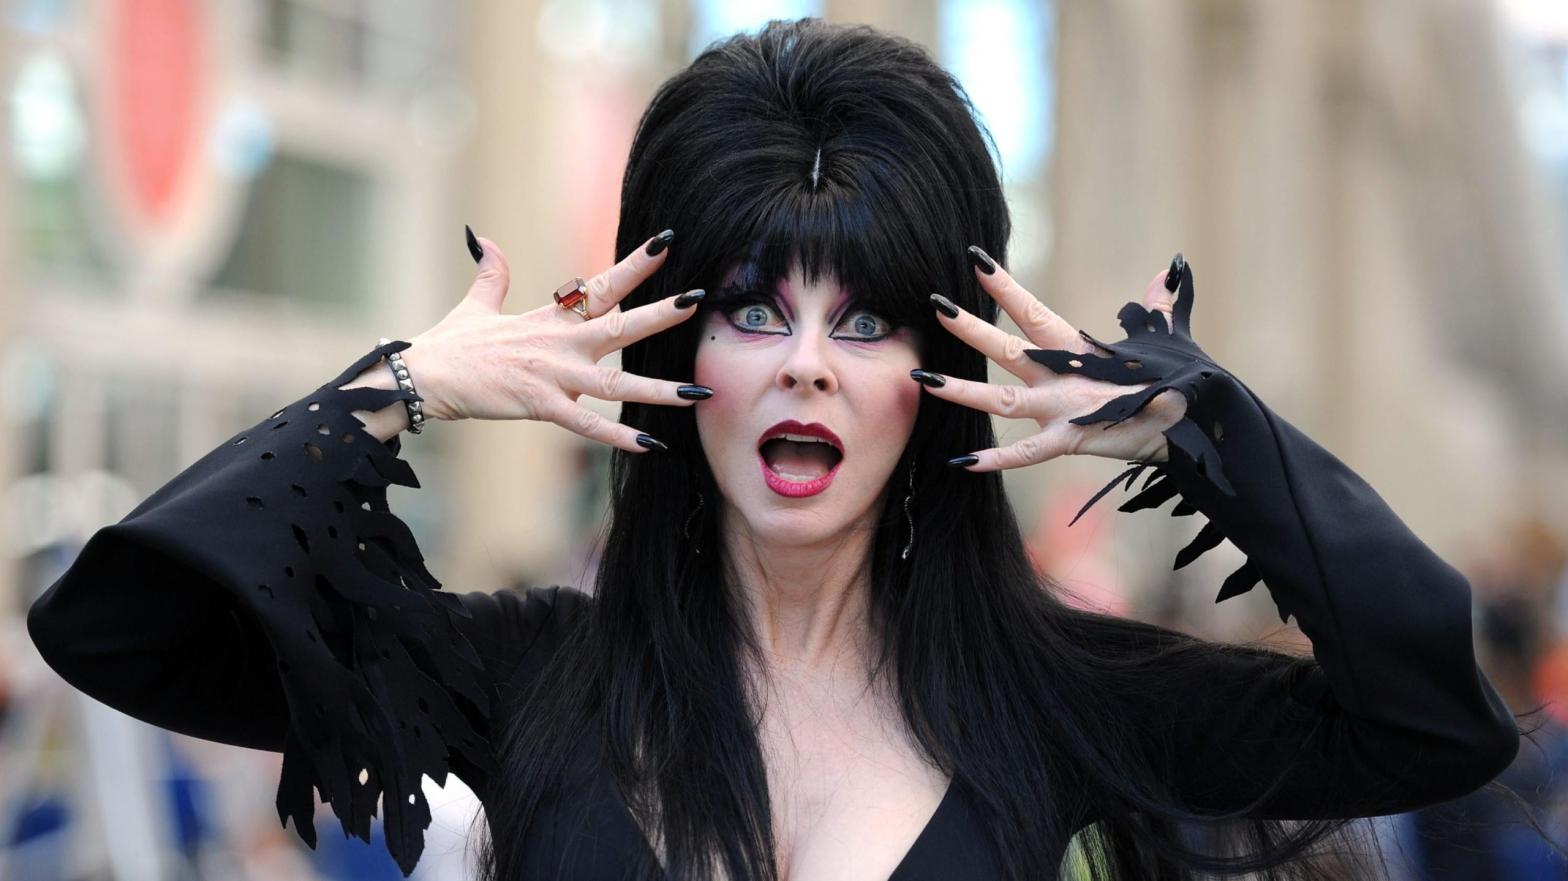 Elvira, Mistress of the Dark poses at the 2011 San Diego Comic-Con. (Photo: Frazer Harrison, Getty Images)